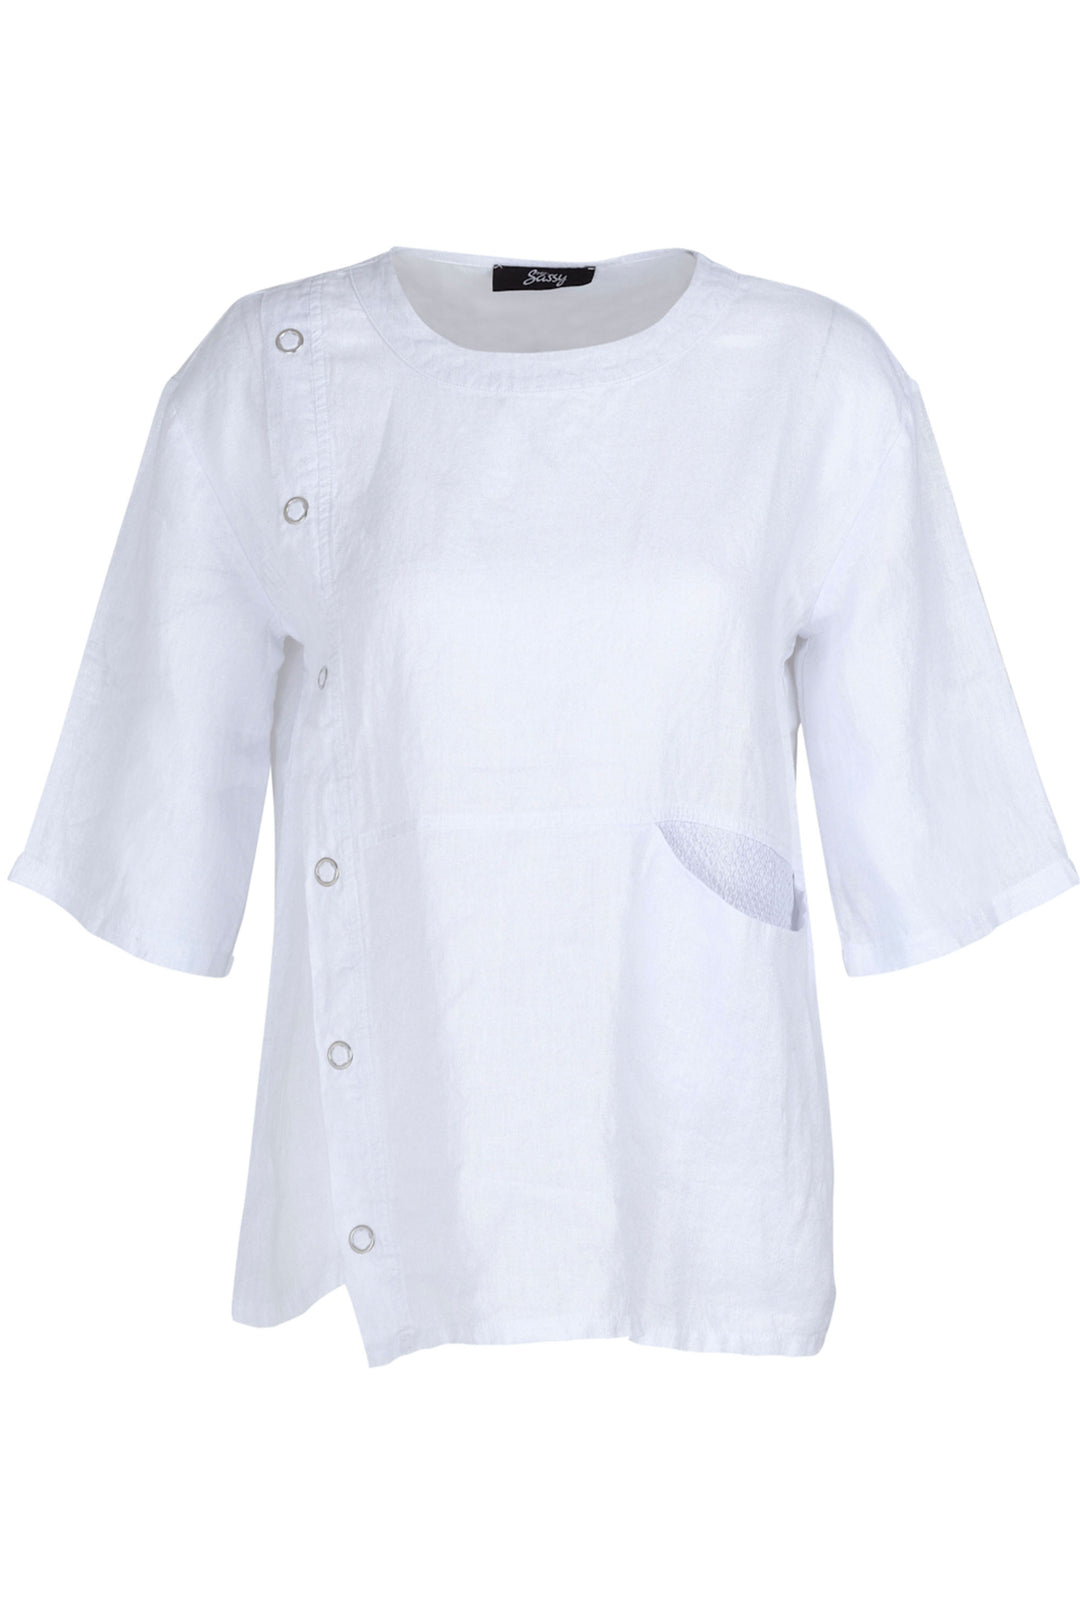 EverSassy Spring 2023 wone's casual loose linen top with pocket and snap details - white front